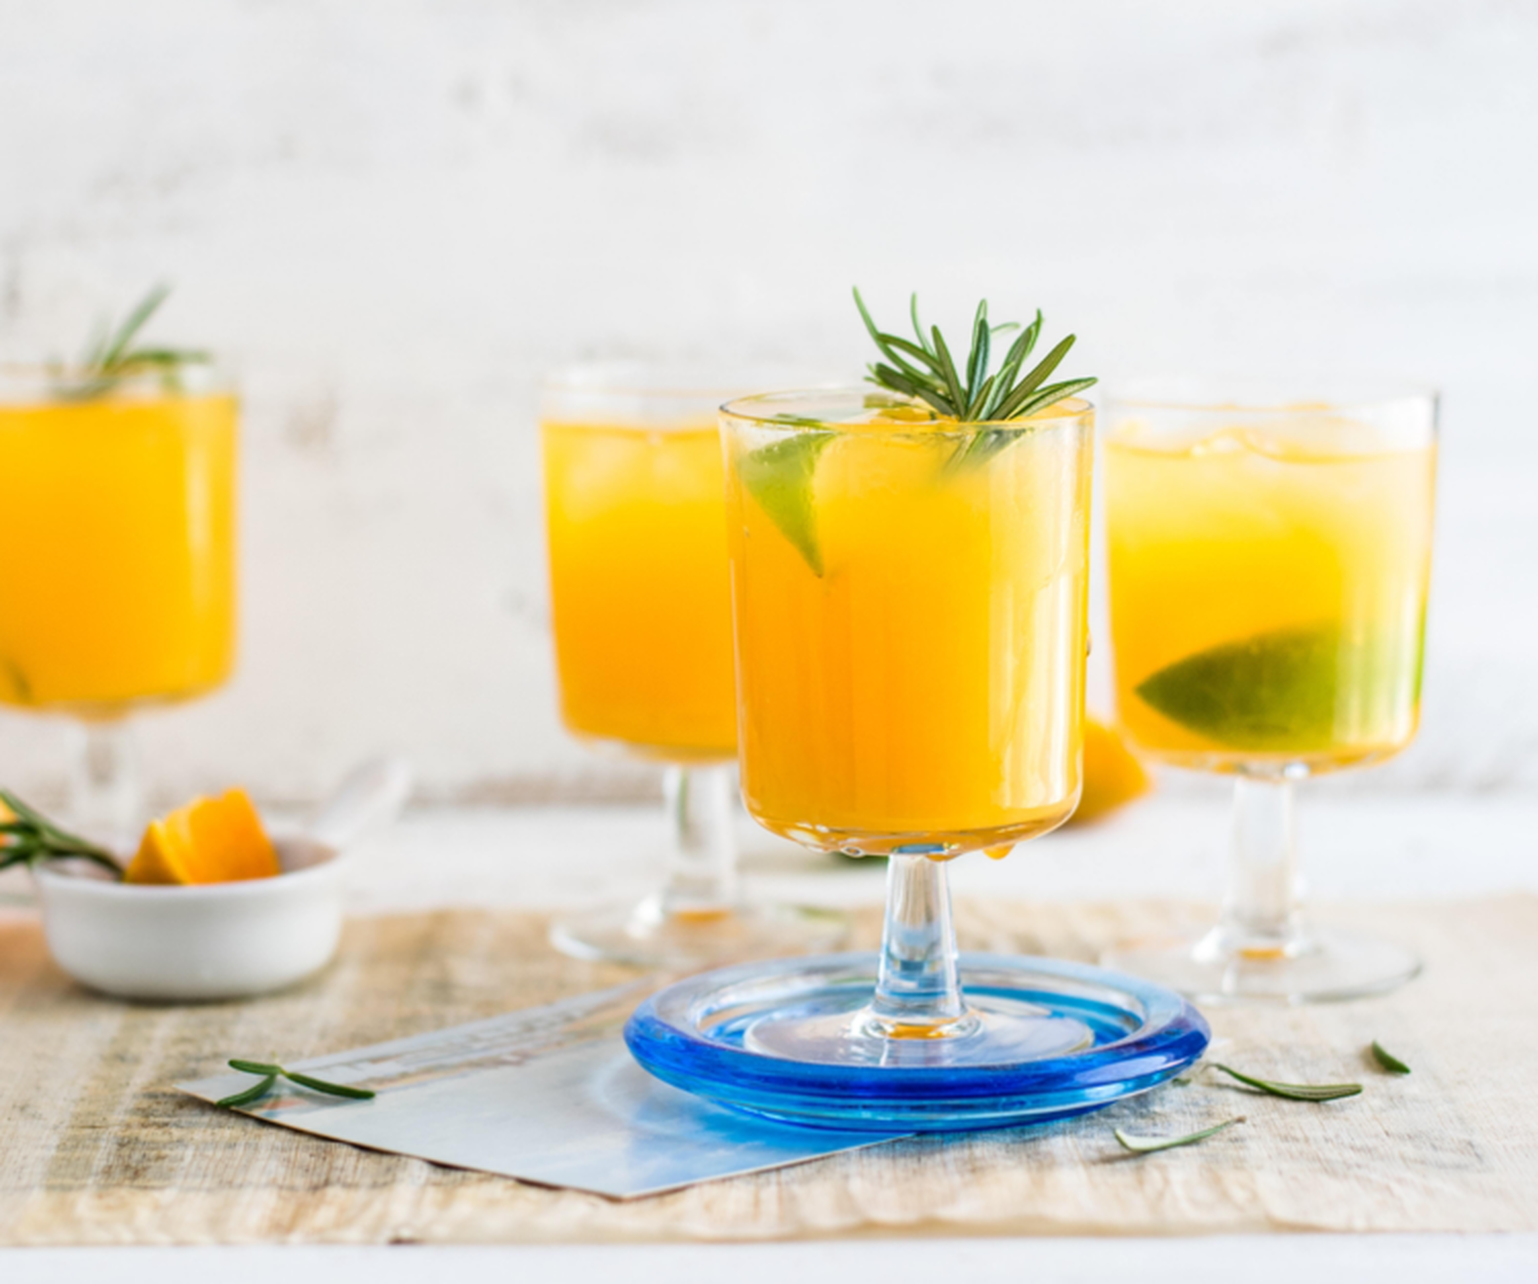 Image of four mimosa cocktails